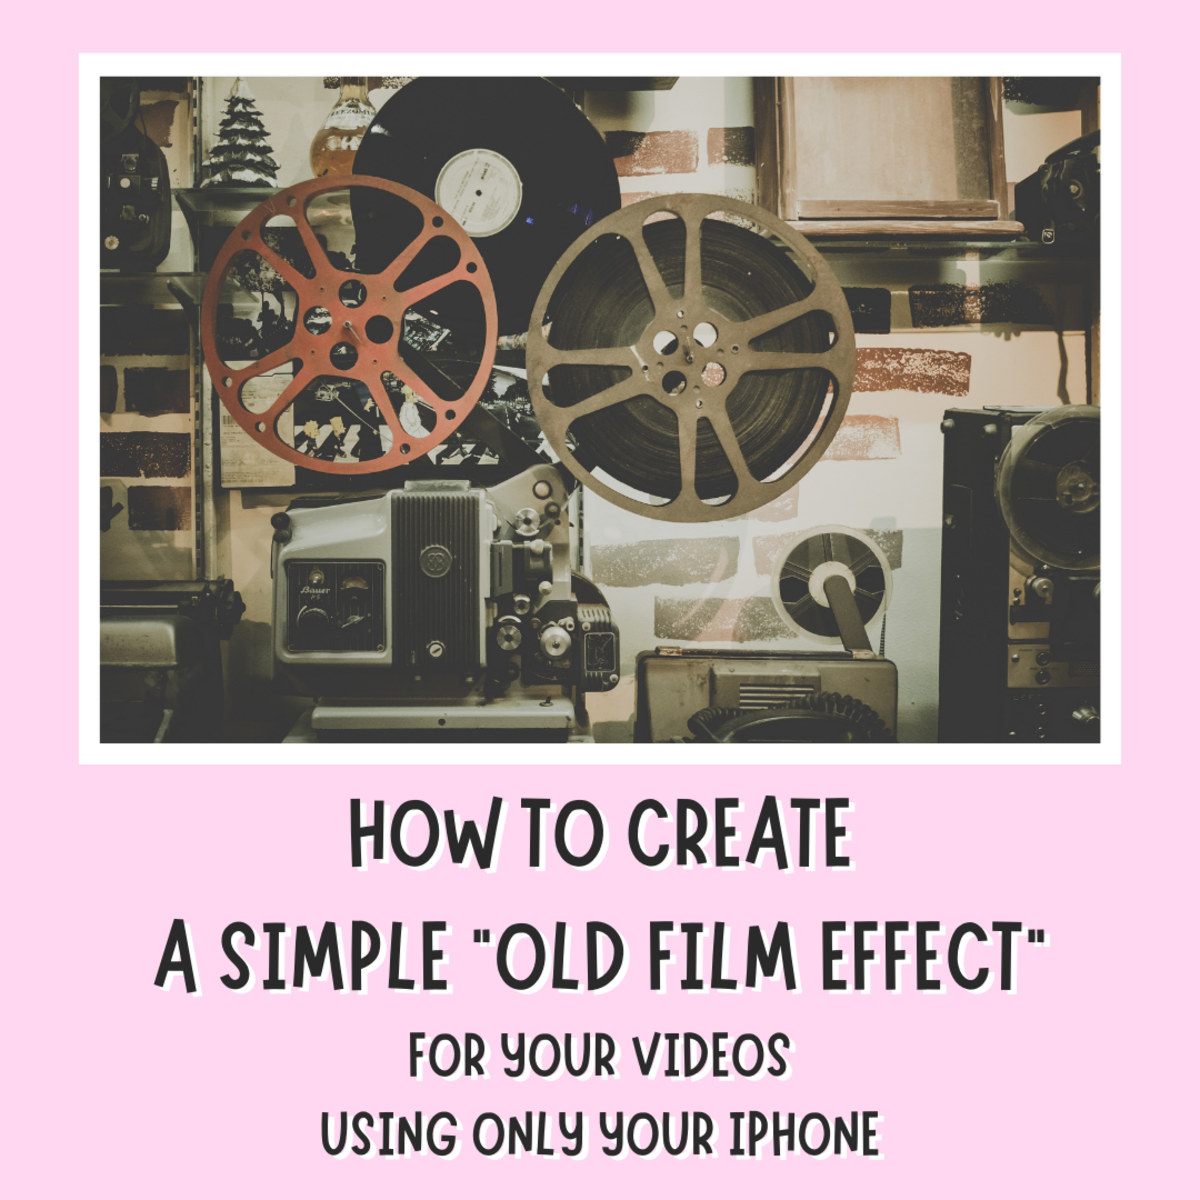 old-film-effect-video-editing-tips-iphone